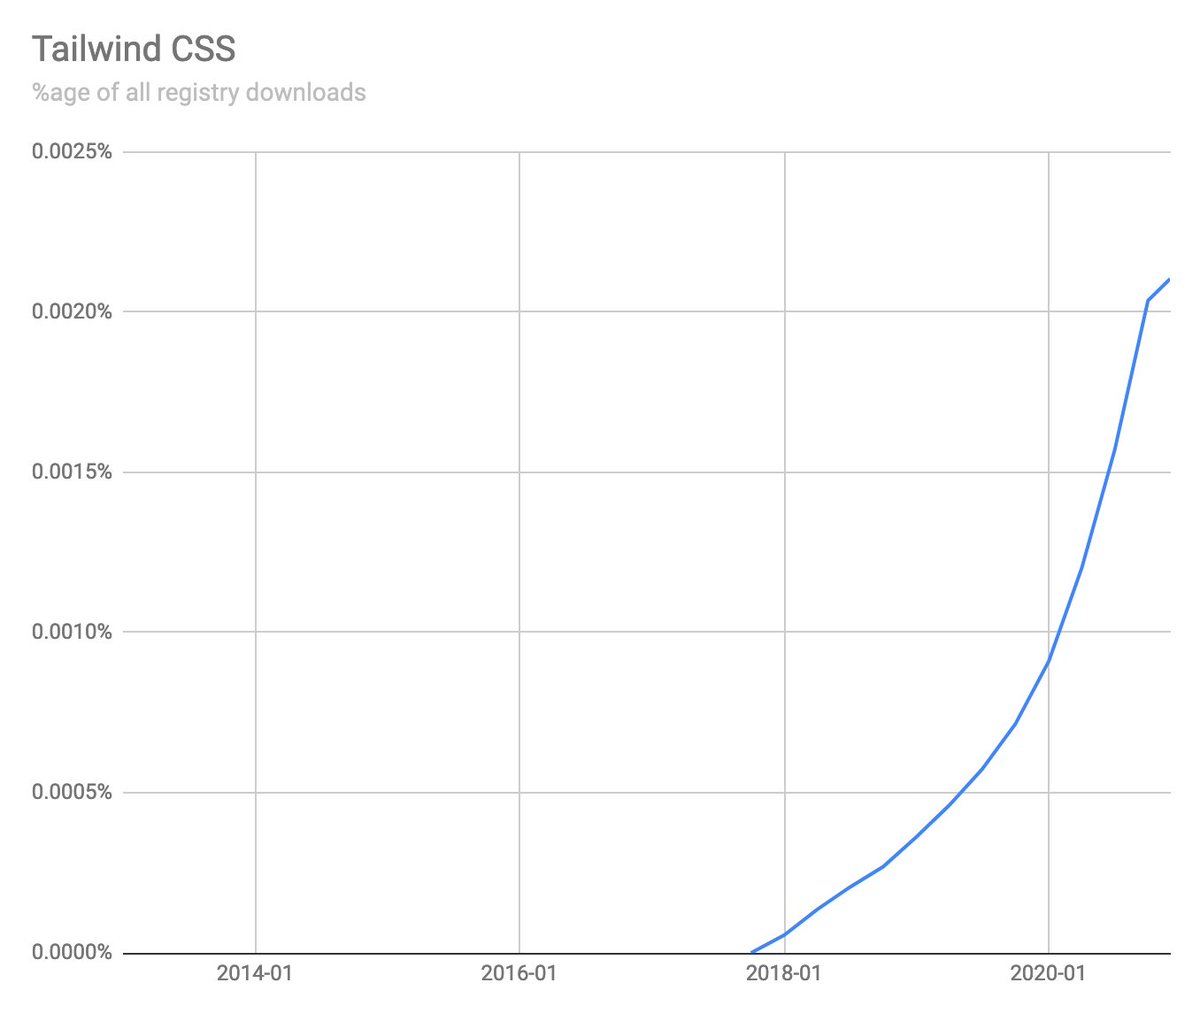  @TimHaines wanted to know how Tailwind CSS is doing and the answer is *beautifully*, what a pretty curve that is. Maybe it's one of the non-competing frameworks putting pressure on the registry overall?